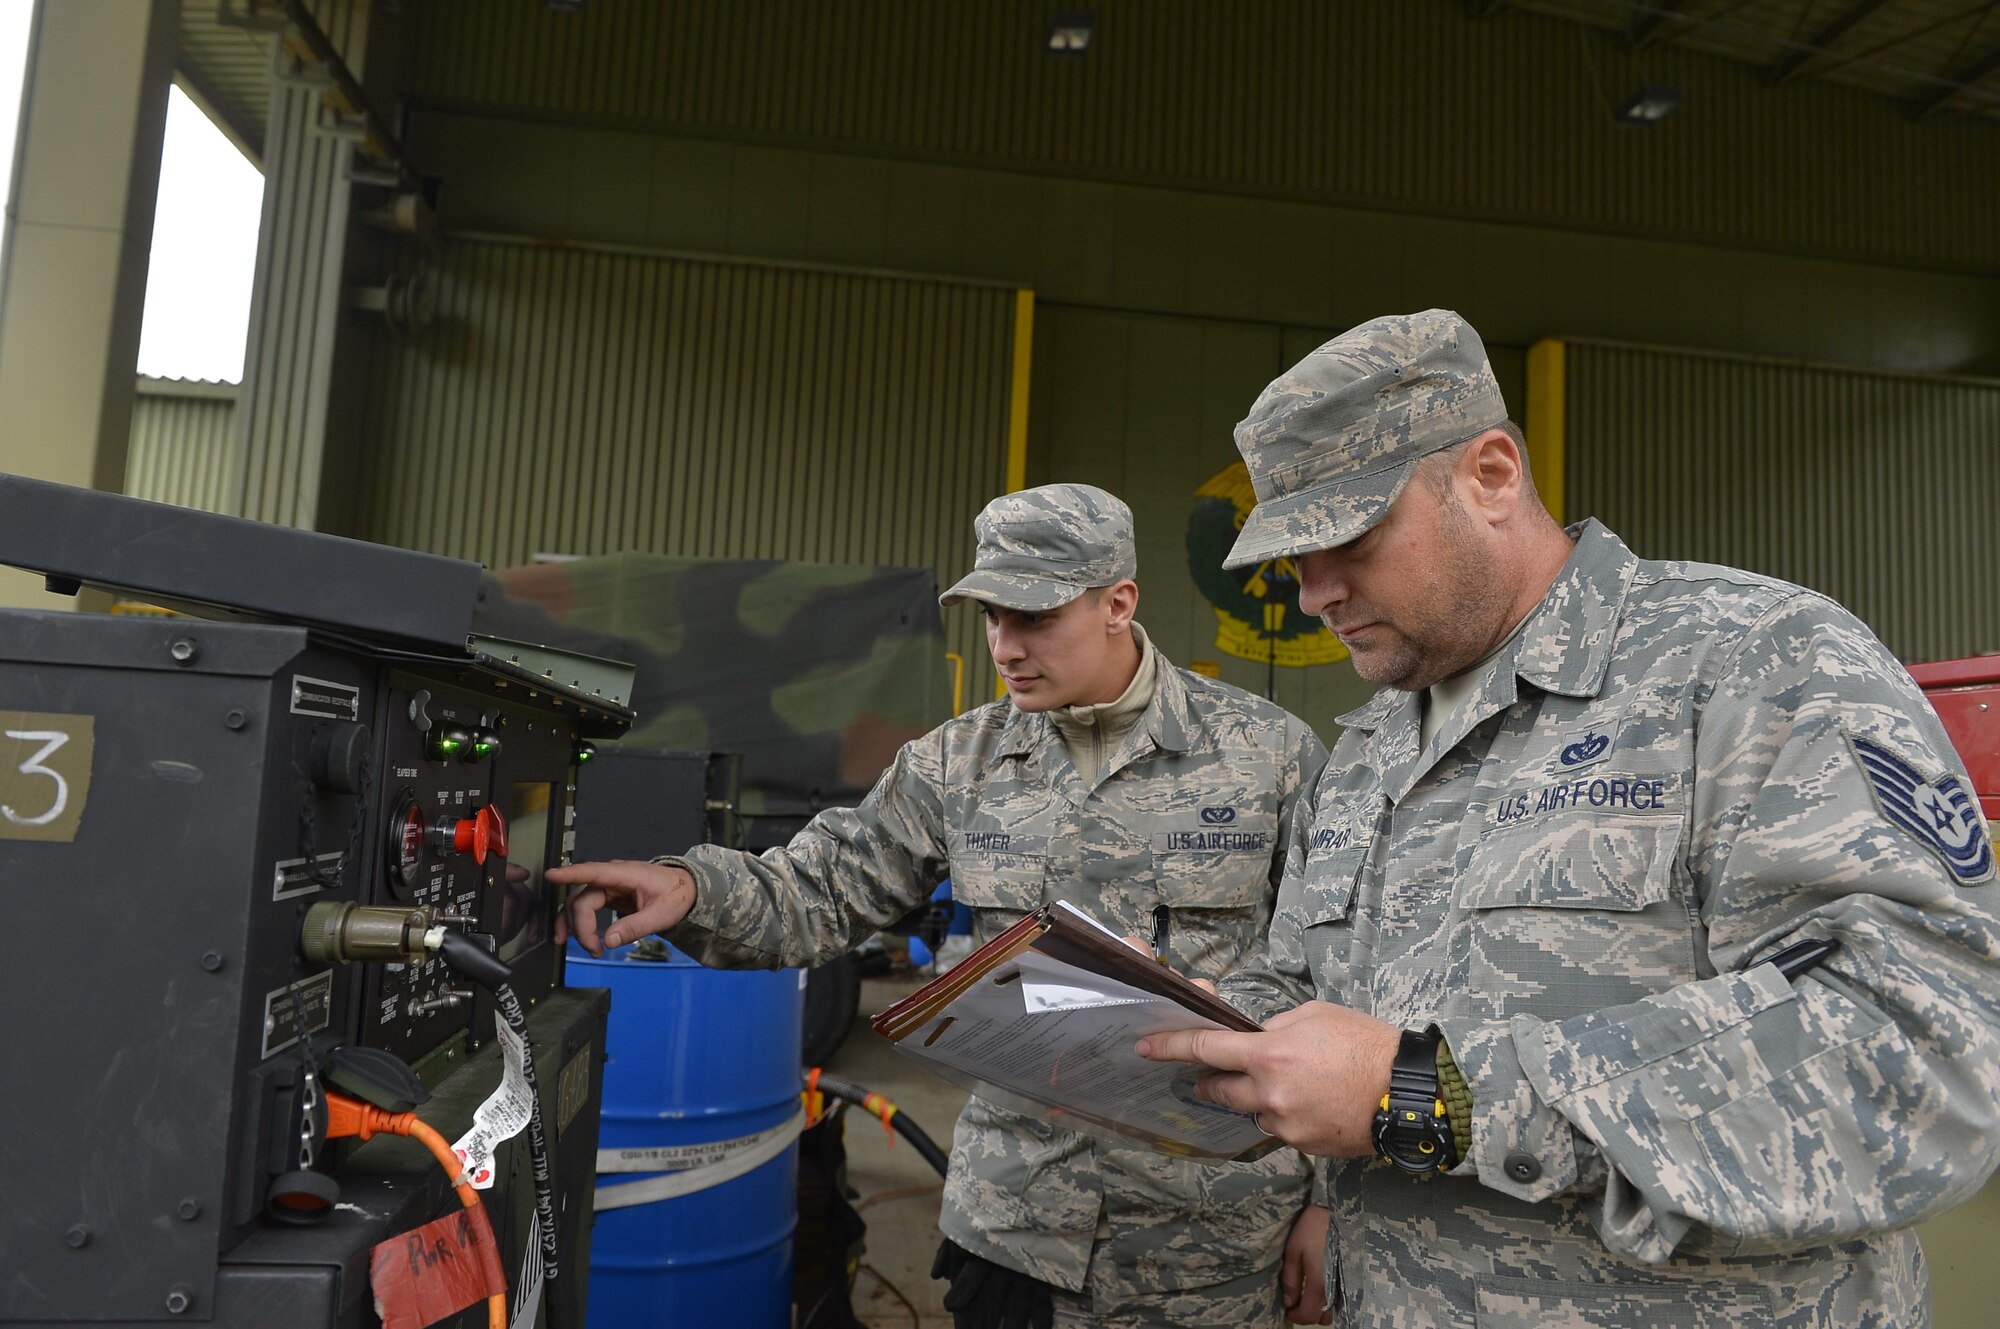 U.S. Air Force Tech. Sgt. James Kamrar, 1st Combat Communications Squadron power production supervisor, right, and Senior Airman Jacob Thayer, 1st CBCS HVAC supervisor, conduct a generator check during an exercise on Rhine Ordnance Barracks, Germany, Oct. 26, 2017. Airmen assigned to the 1st CBCS not only come from the communications career field, but also civil engineers. (U.S. Air Force photo by Airman 1st Class Joshua Magbanua)